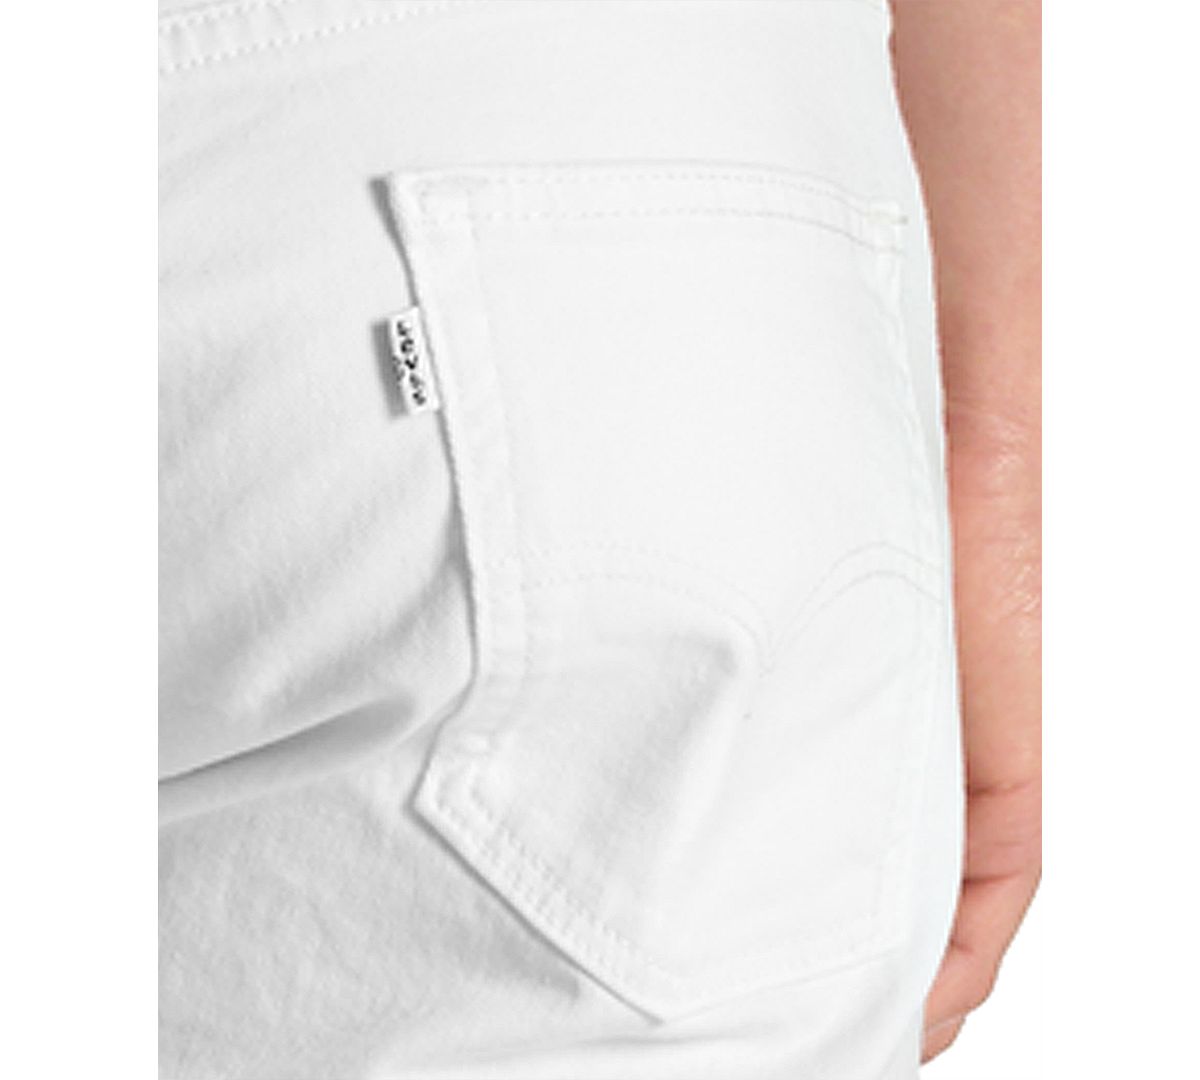 Levi's 514 Straight Fit Jeans White Stretch